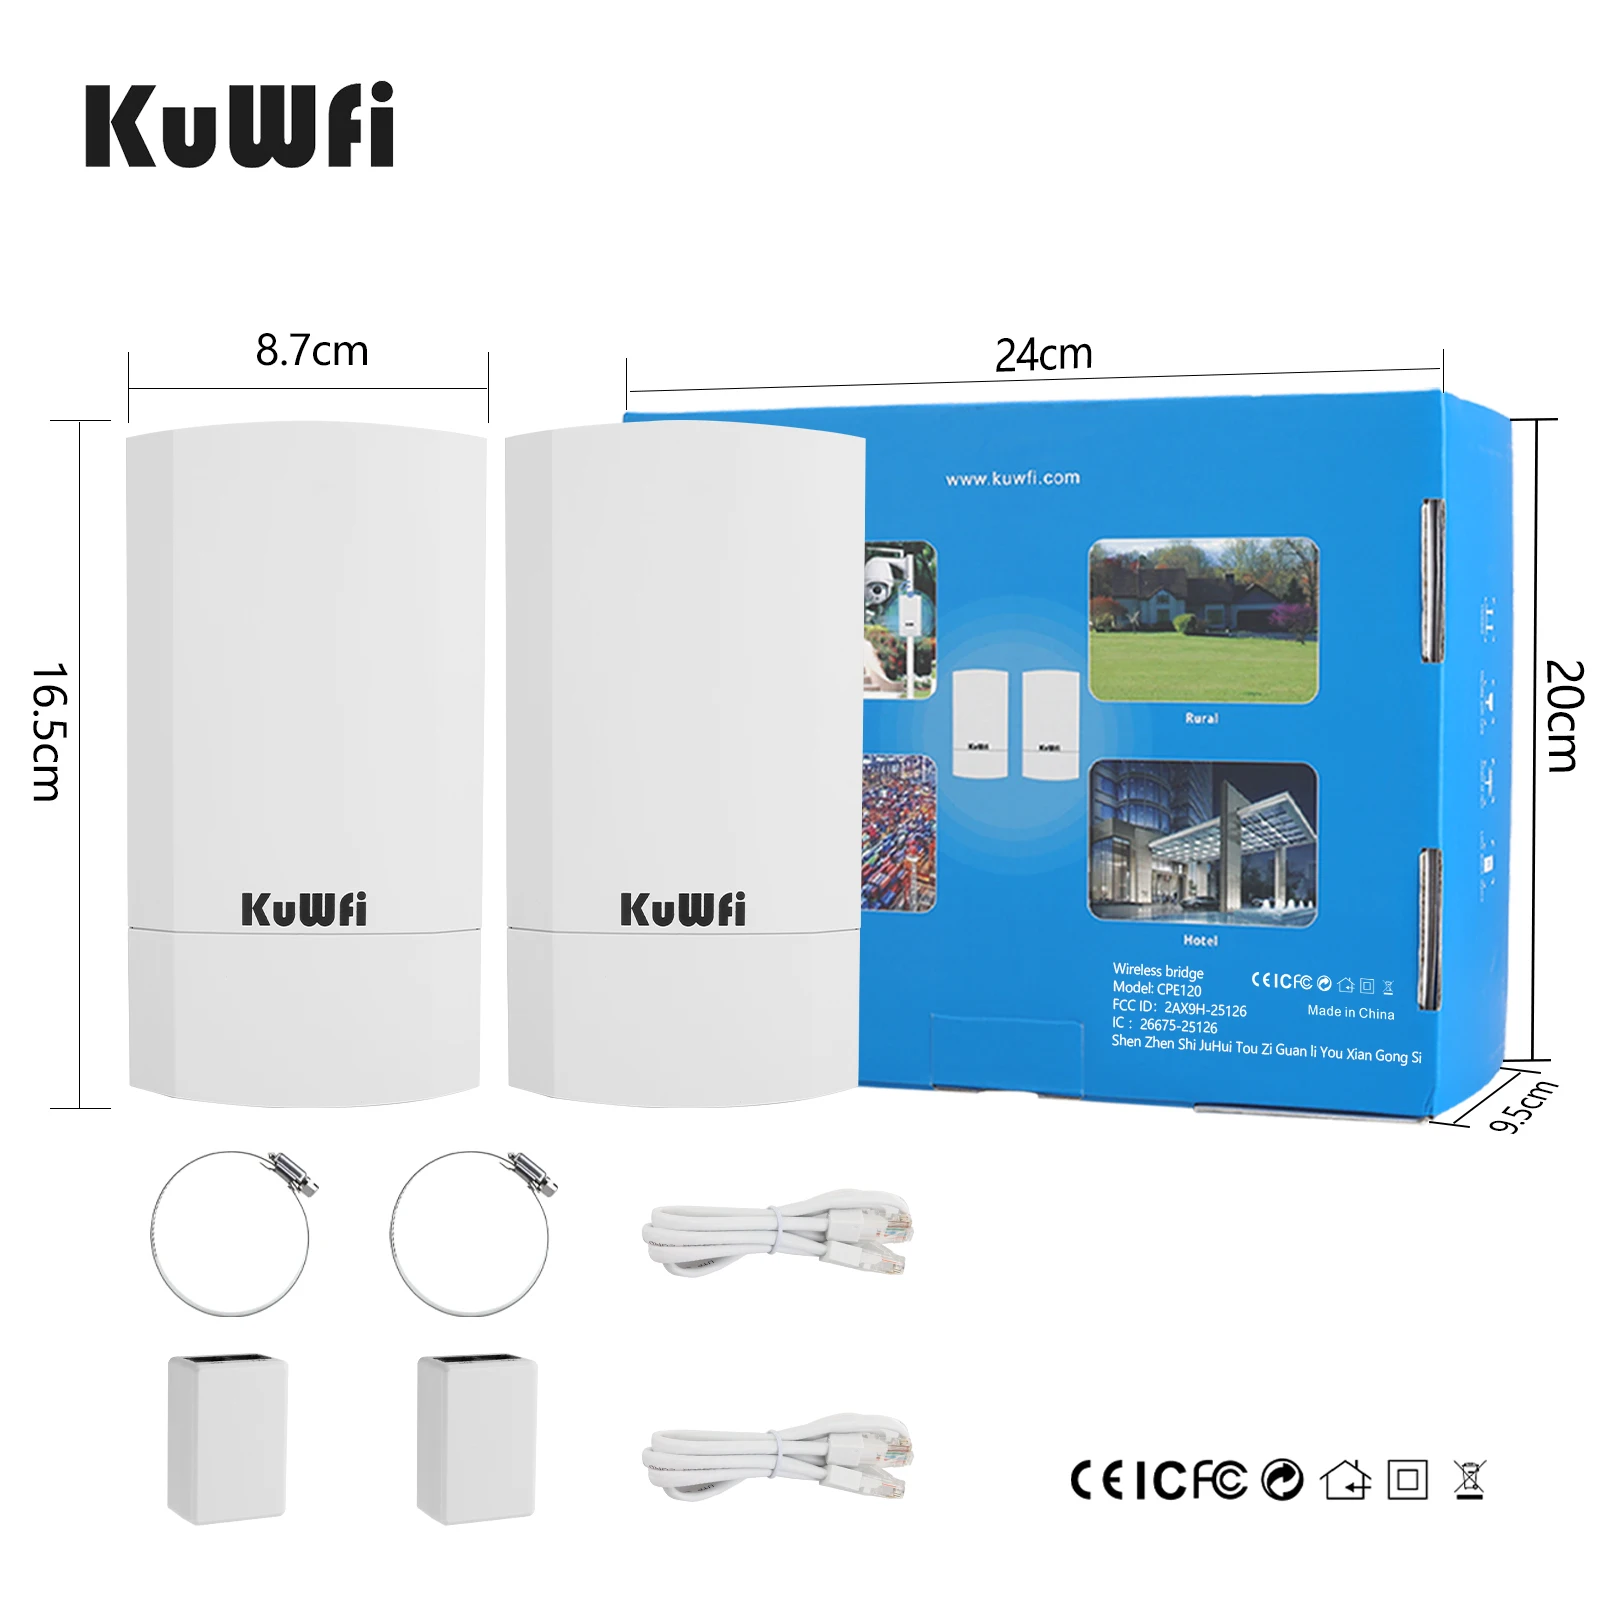 KuWFi 300Mbps Wireless Bridge Router Outdoor 2.4G 1KM Wireless Repeater/Wifi Signal Amplifier Wifi Extender For Camera 32users